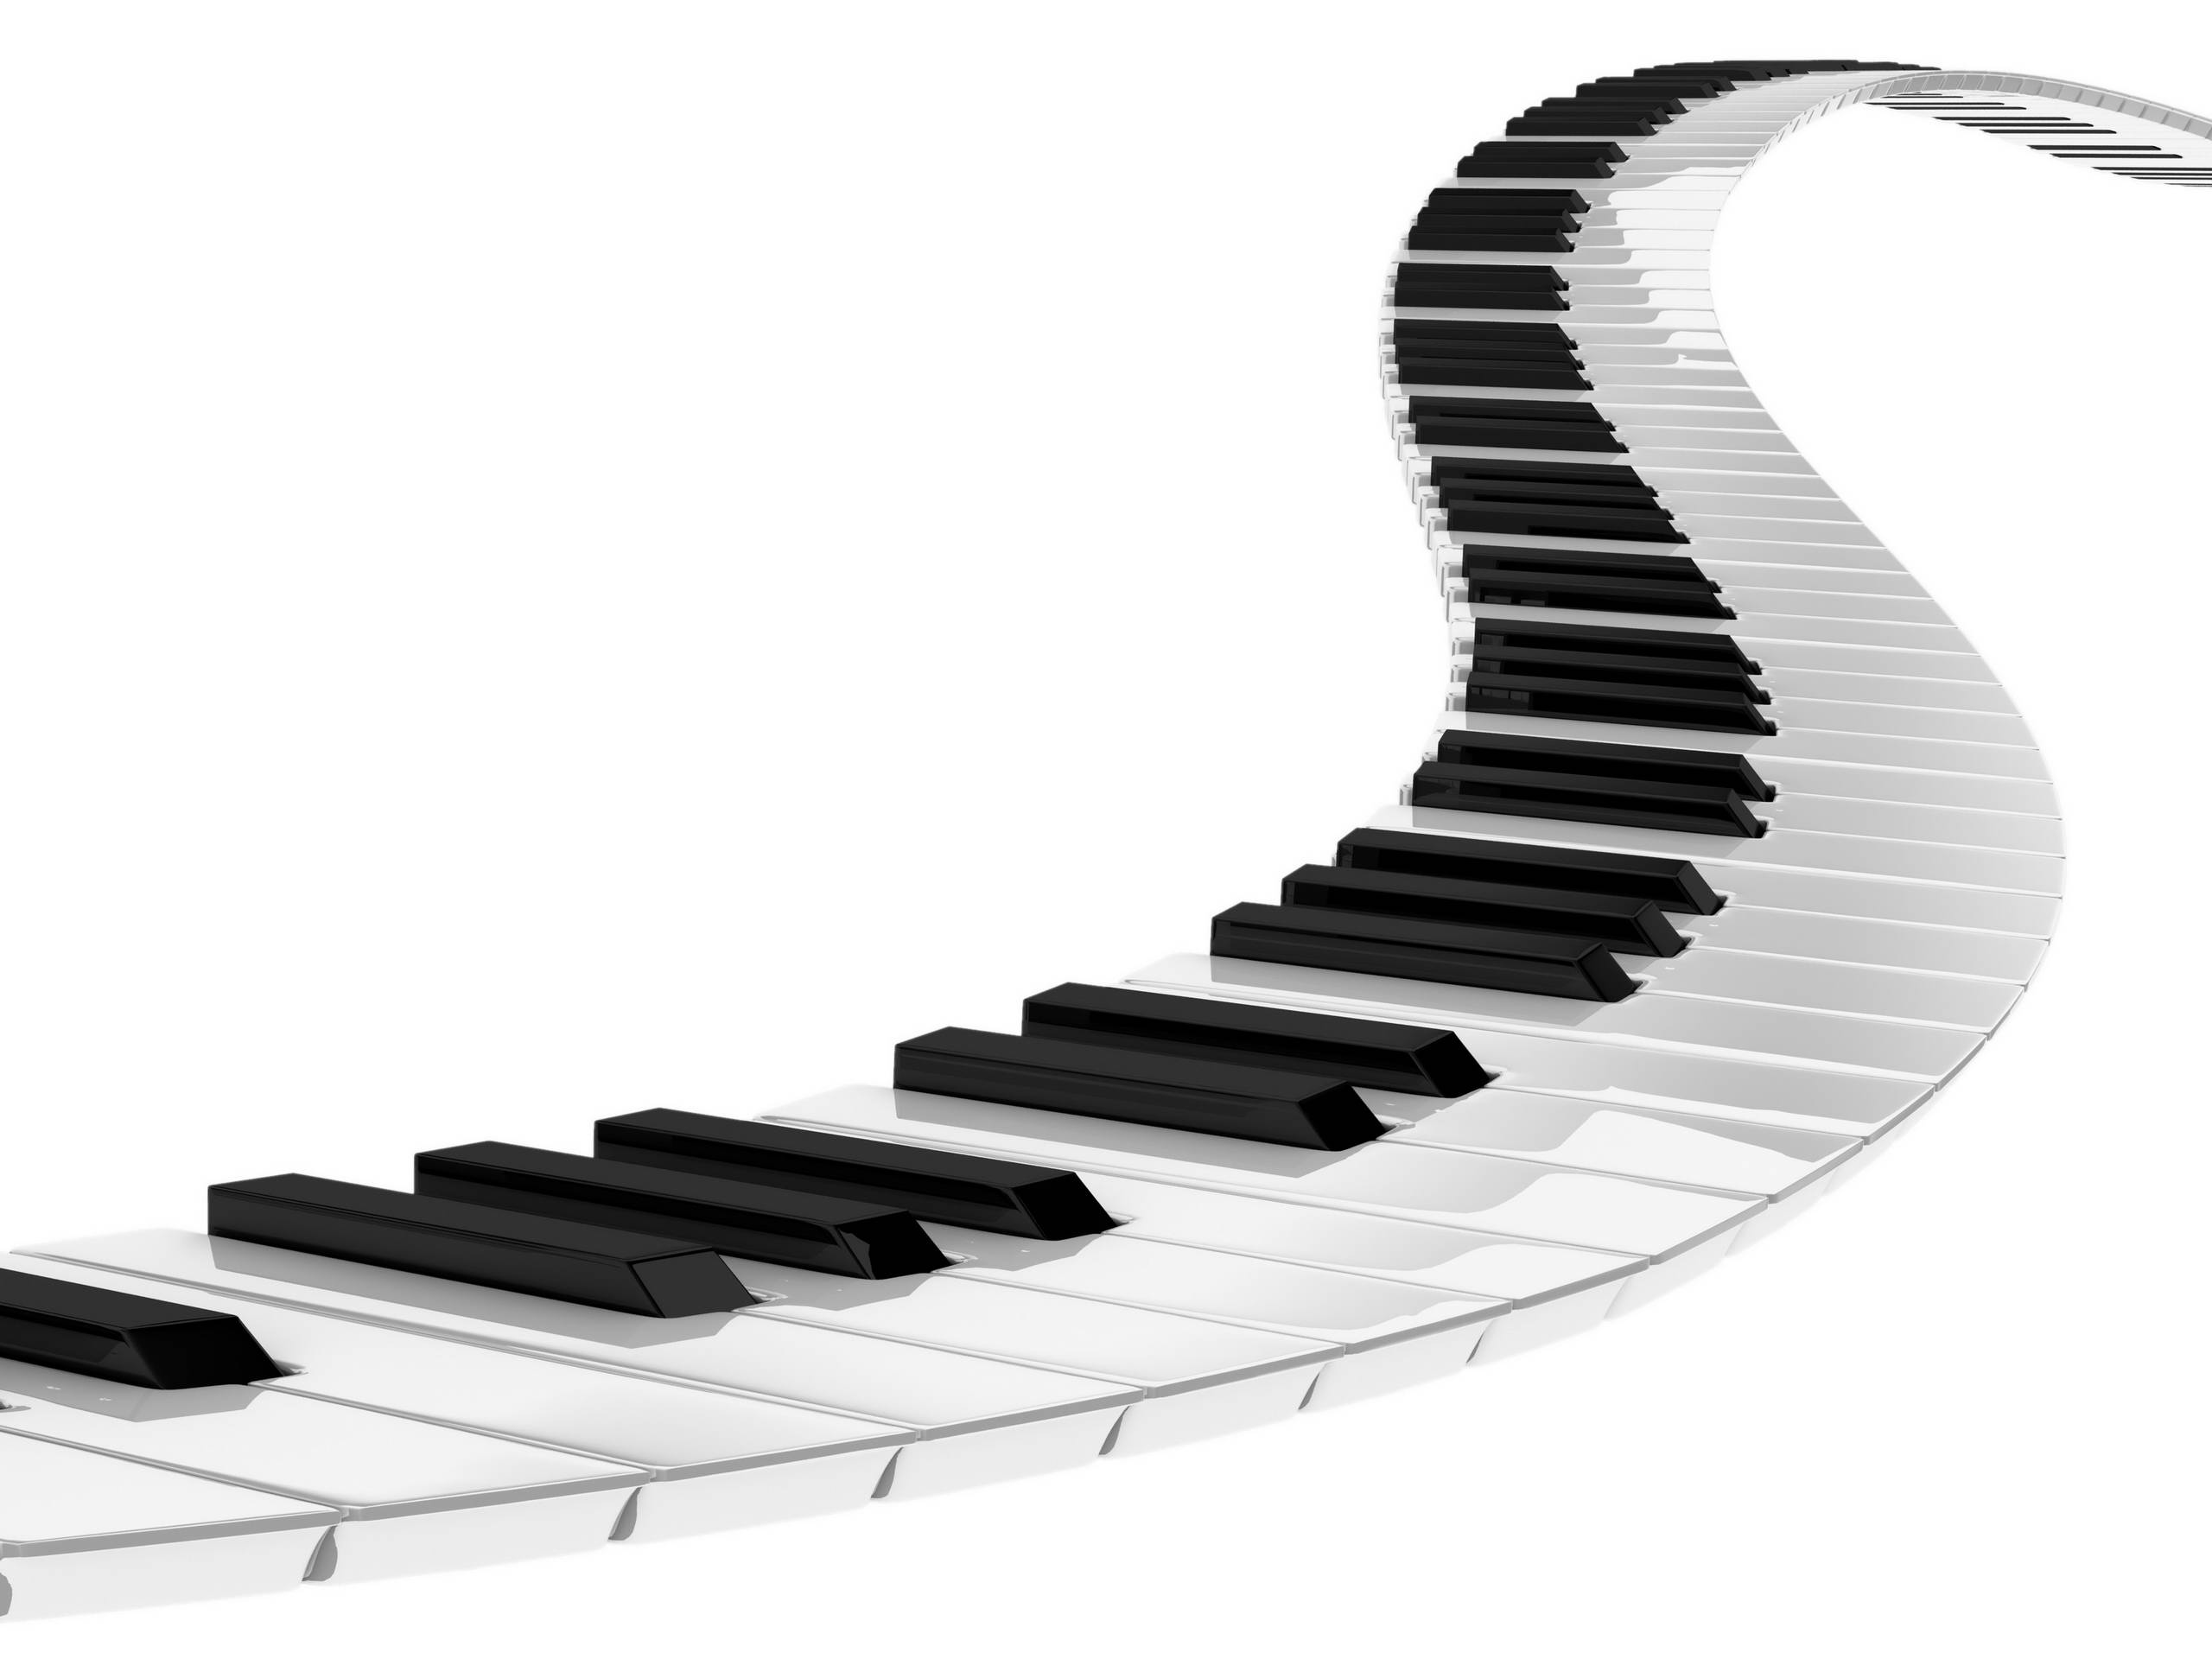 Piano Music Notes Wallpaper 8736 Hd Wallpapers In Music   Imagesci Com